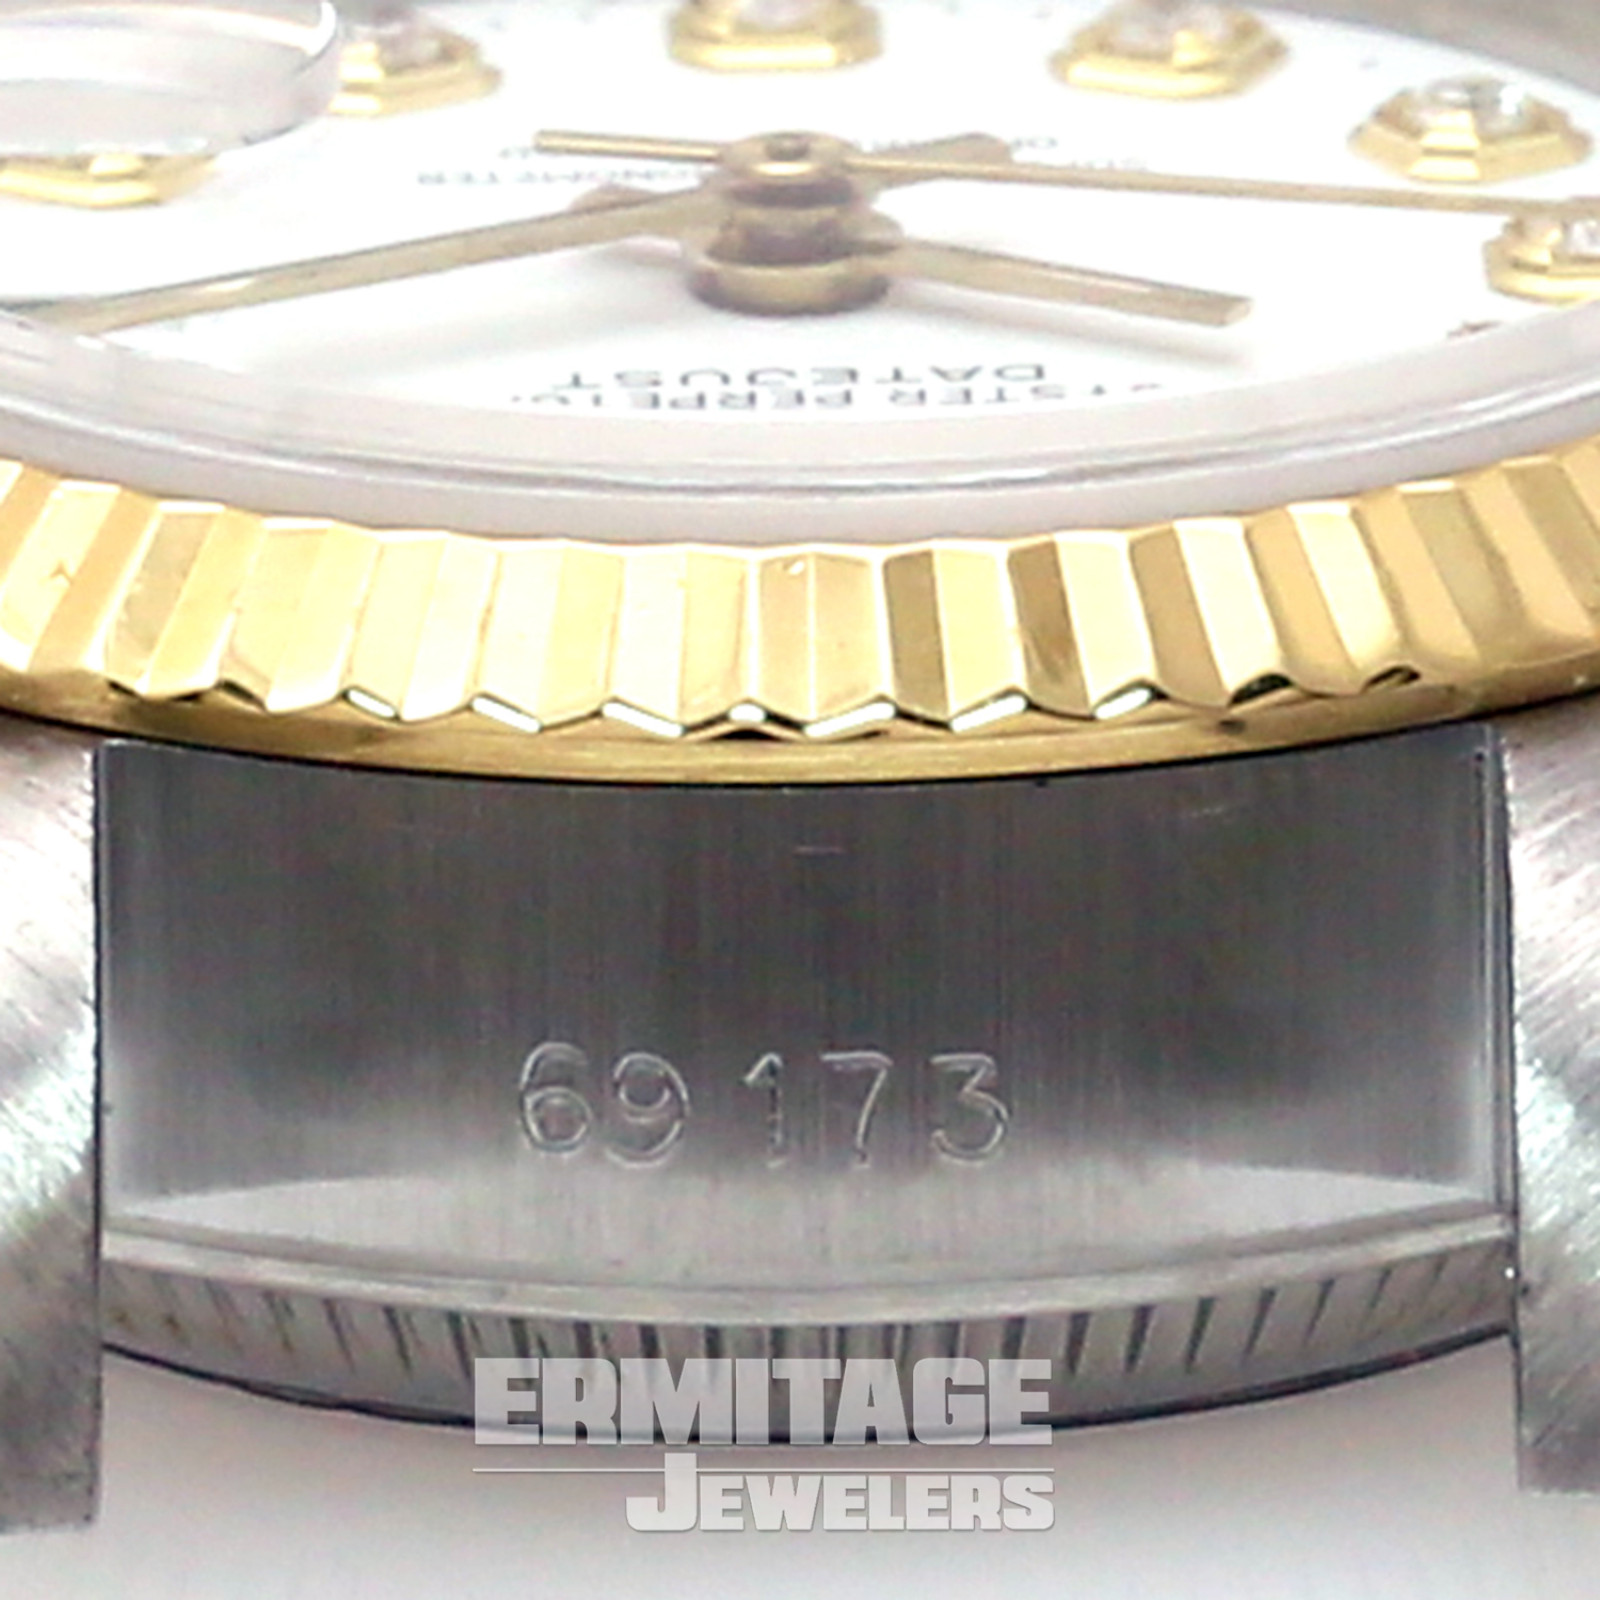 Sell Rolex Datejust 69173 with White Dial